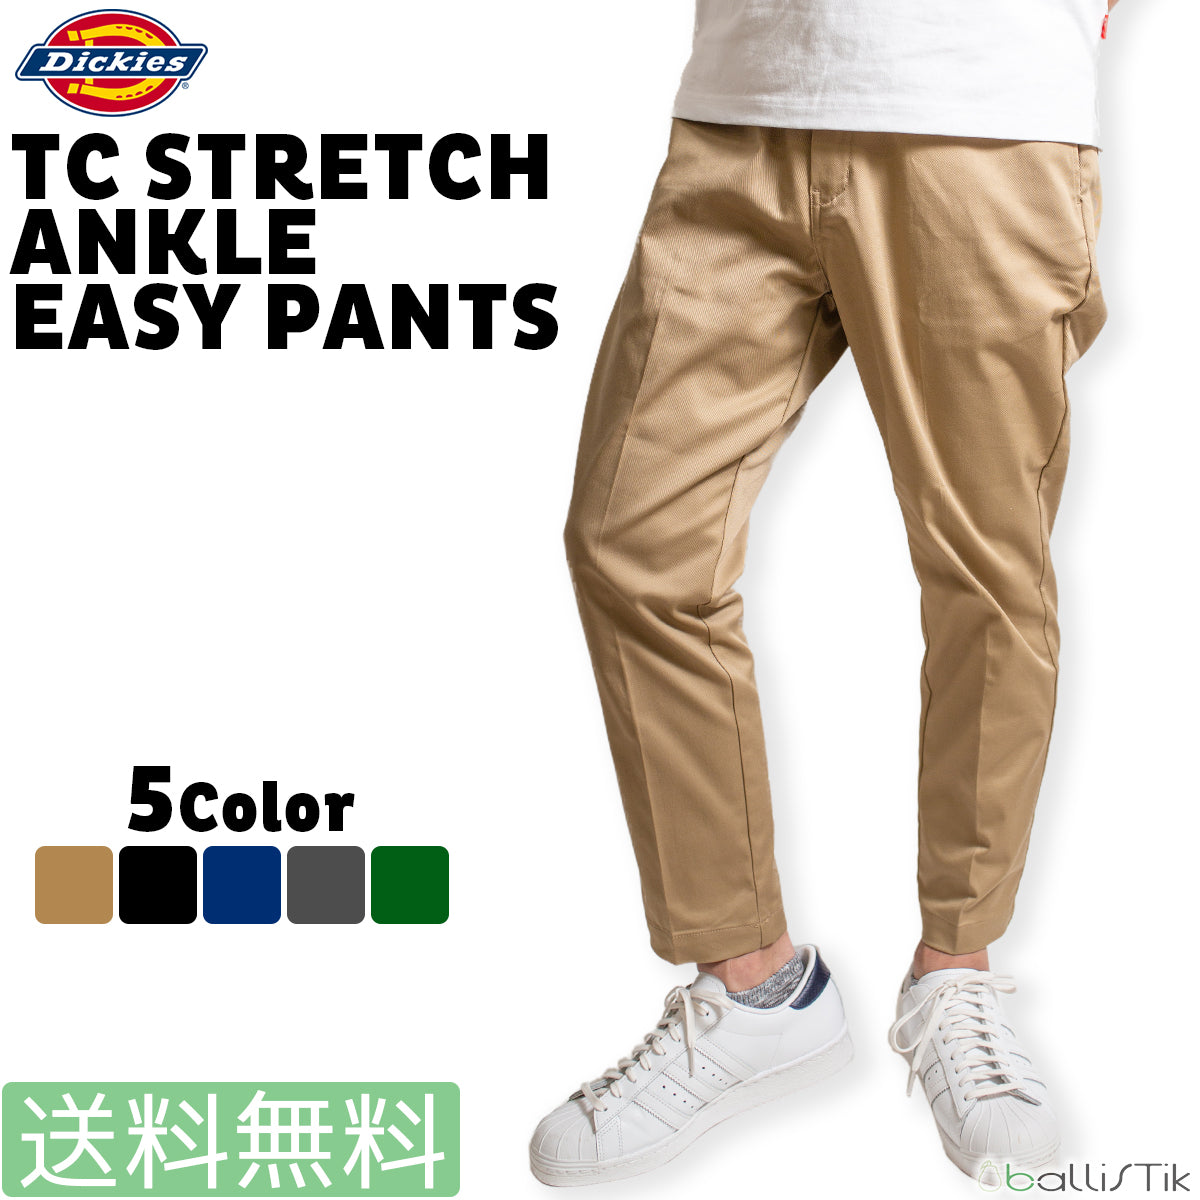 Dickies ディッキーズ クロップドパンツ TC Stretch ankle easy pants